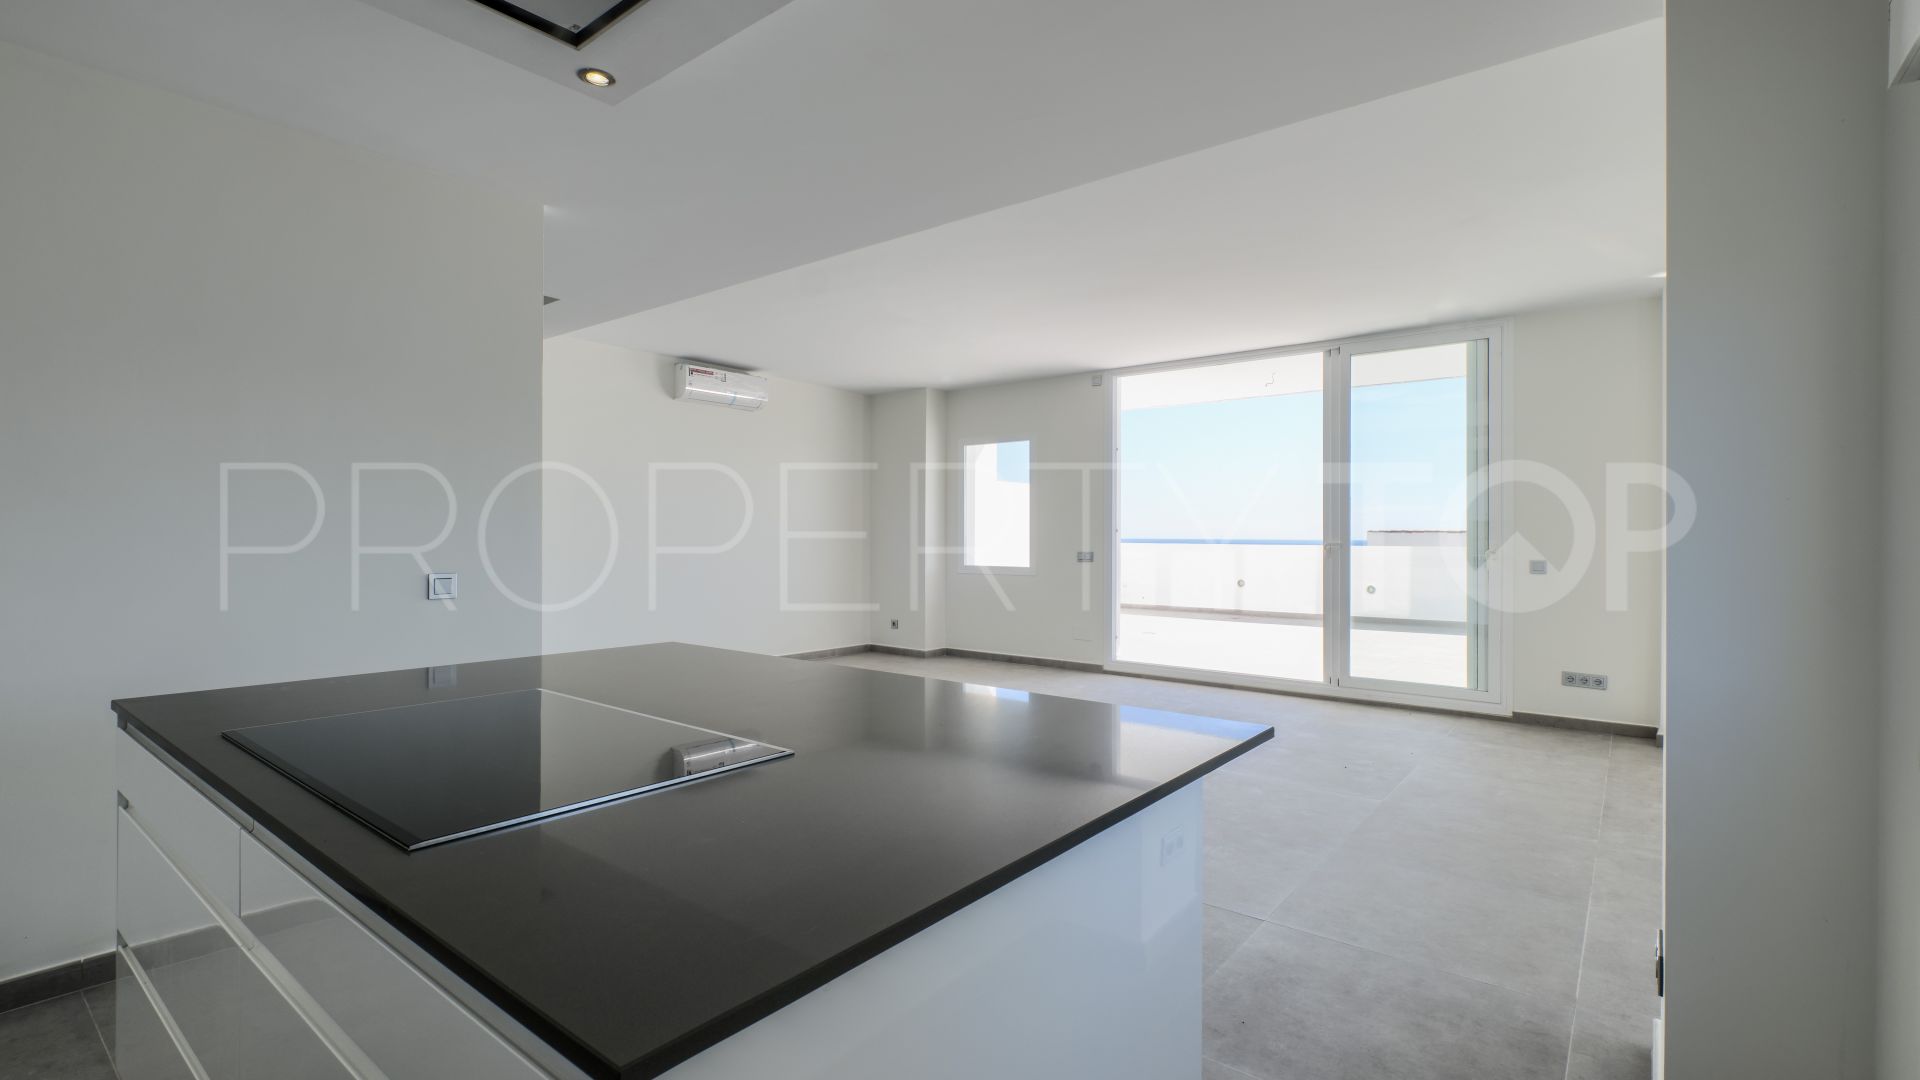 For sale Guadalobon penthouse with 3 bedrooms